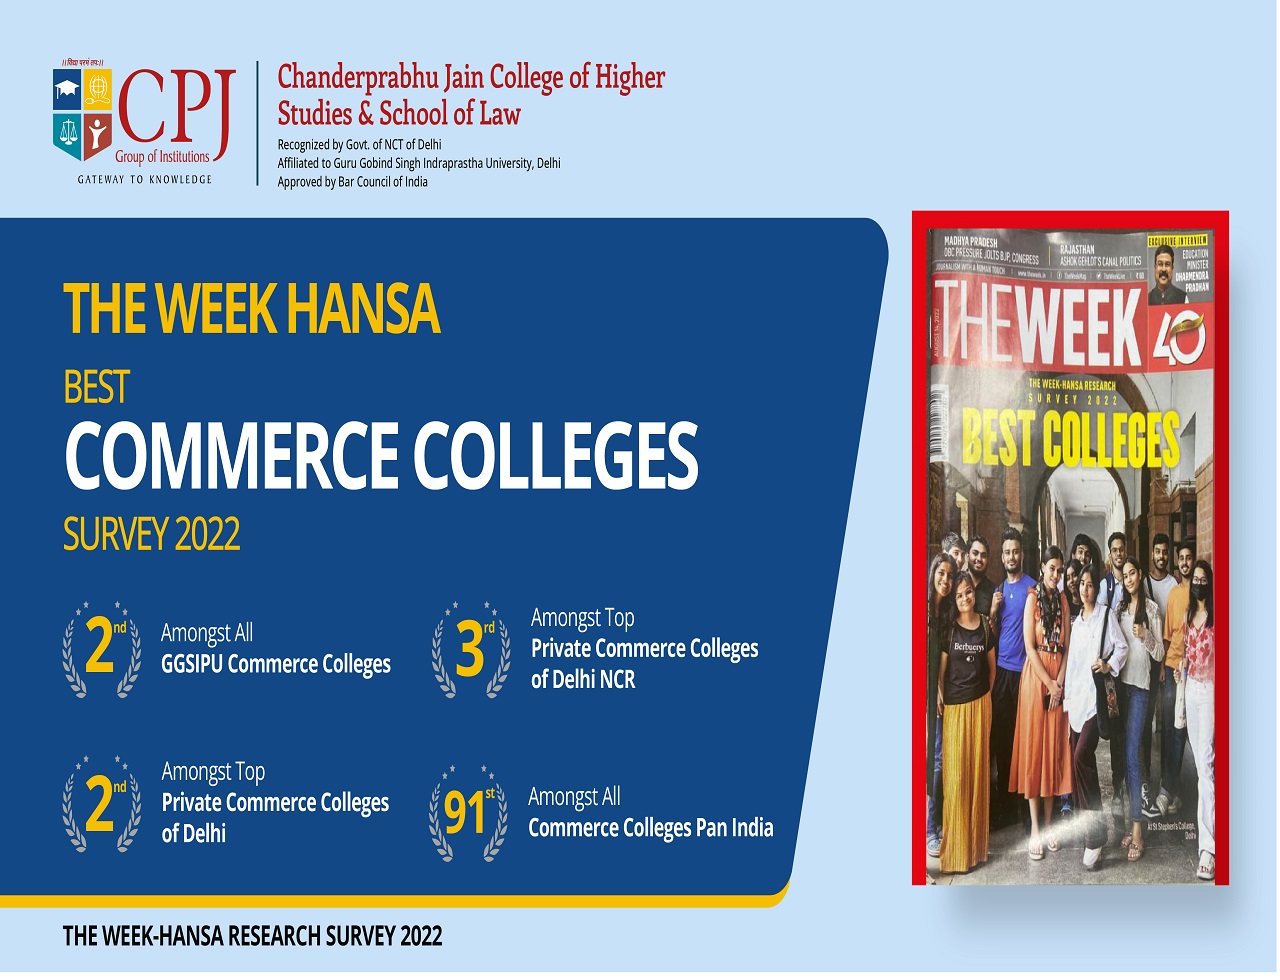 The Week Hansa survey in the Category of best commerce colleges